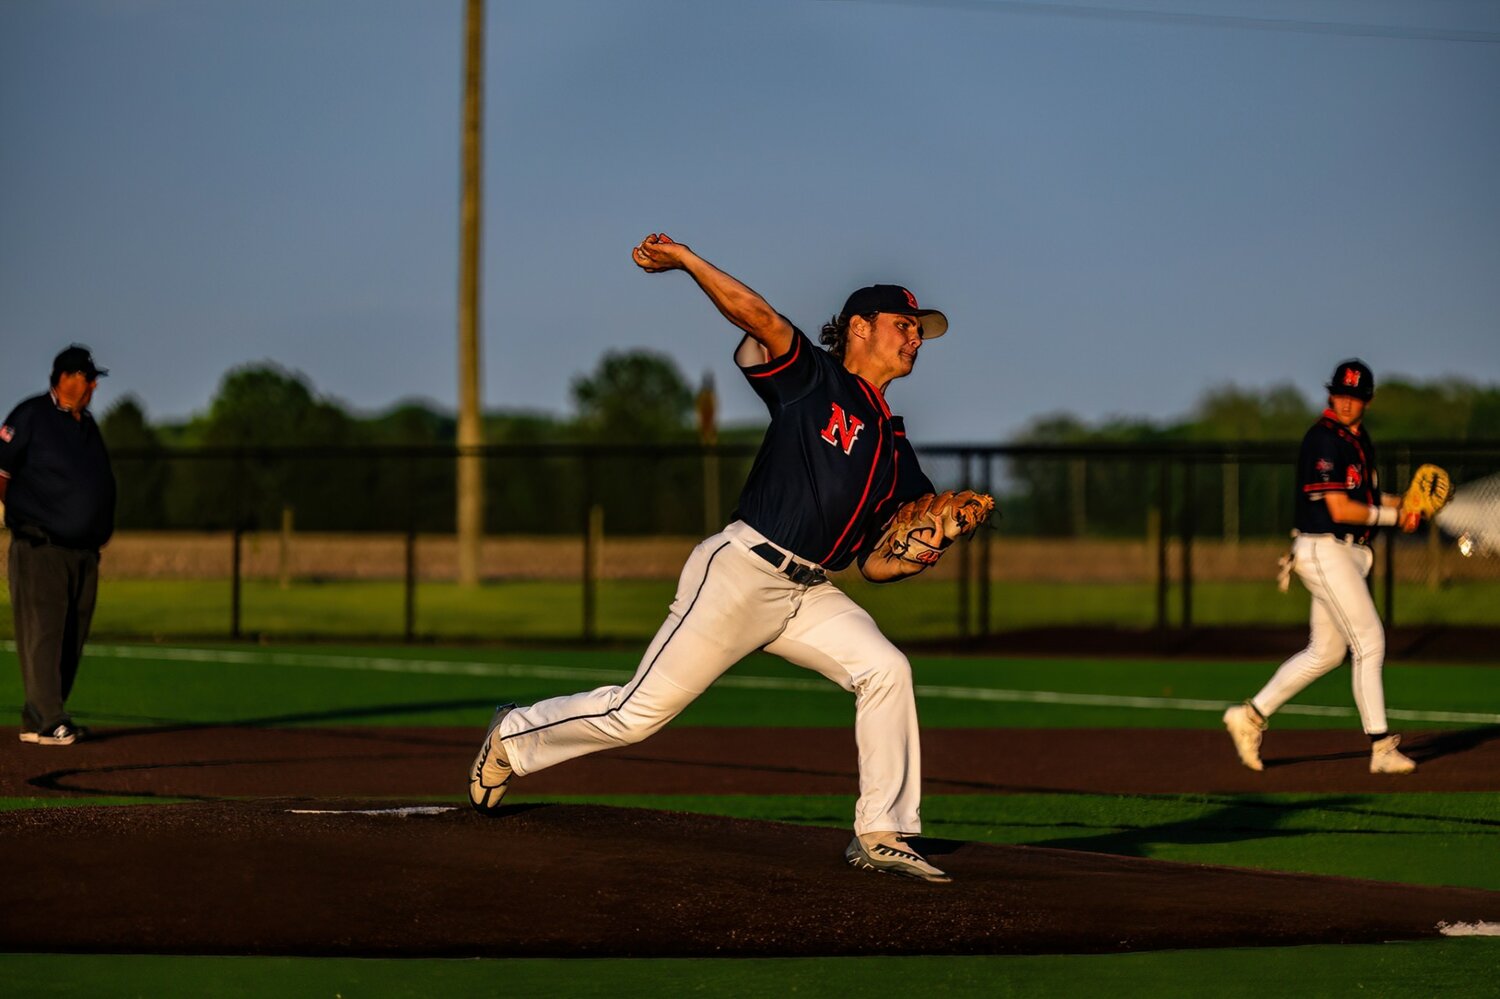 Charger senior pitcher Austin Sulc once again pitched a gem for North Montgomery in their 16-3 sectional opening win over West Lafayette on Wednesday night.